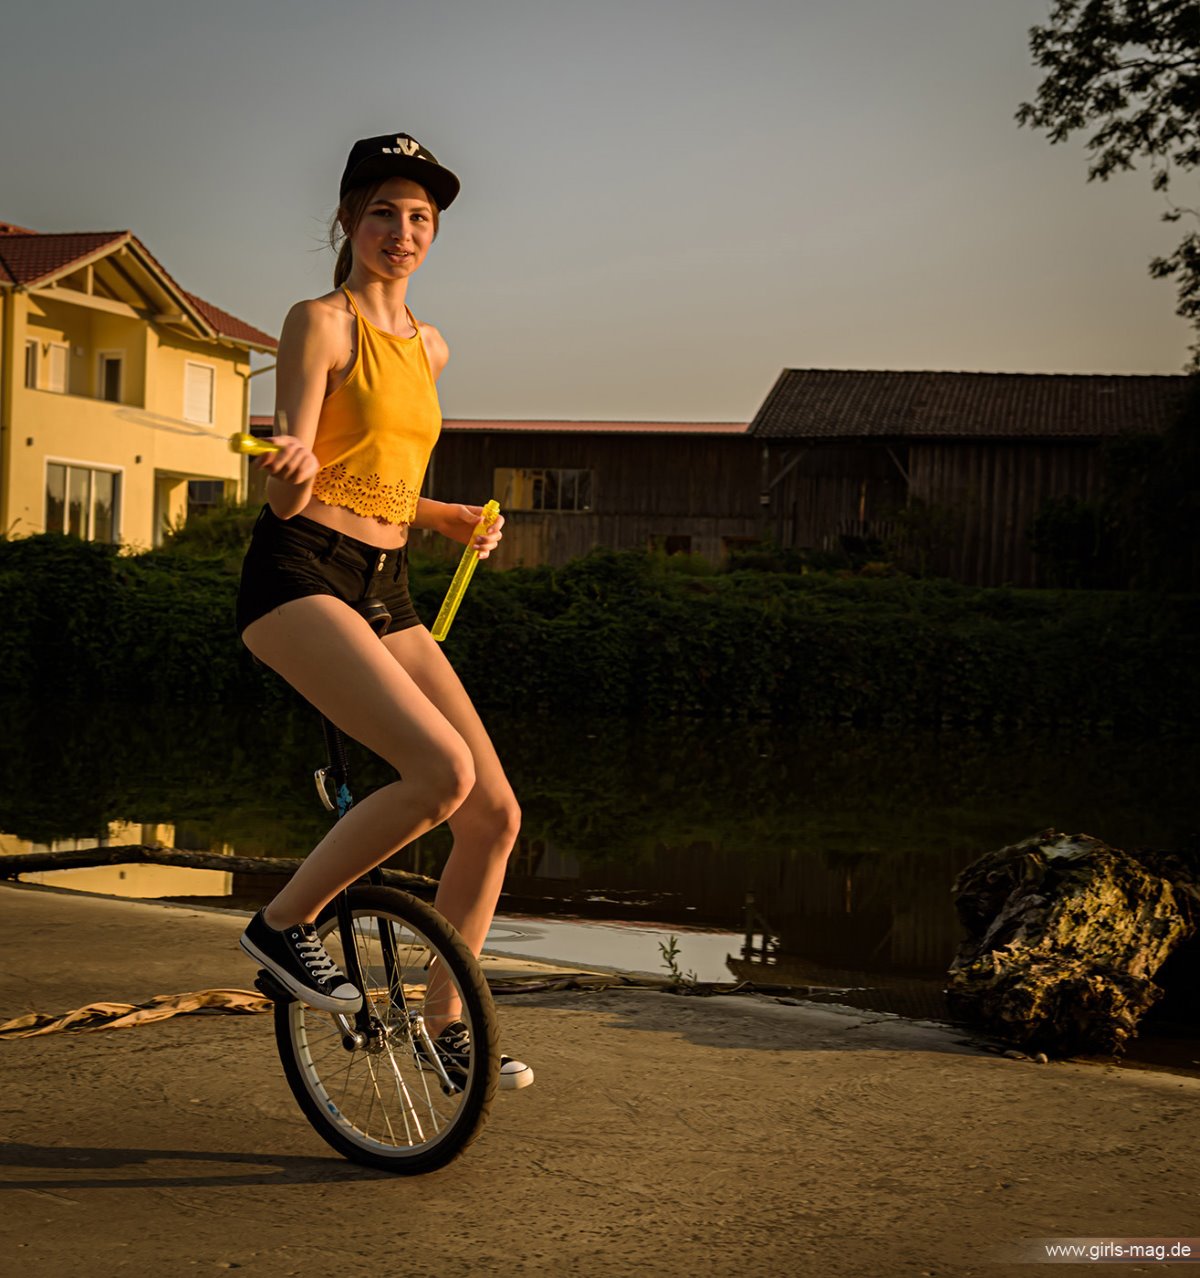 Girls Mag Annika Bubbles on a Unicycle 0106 3144102429.jpg